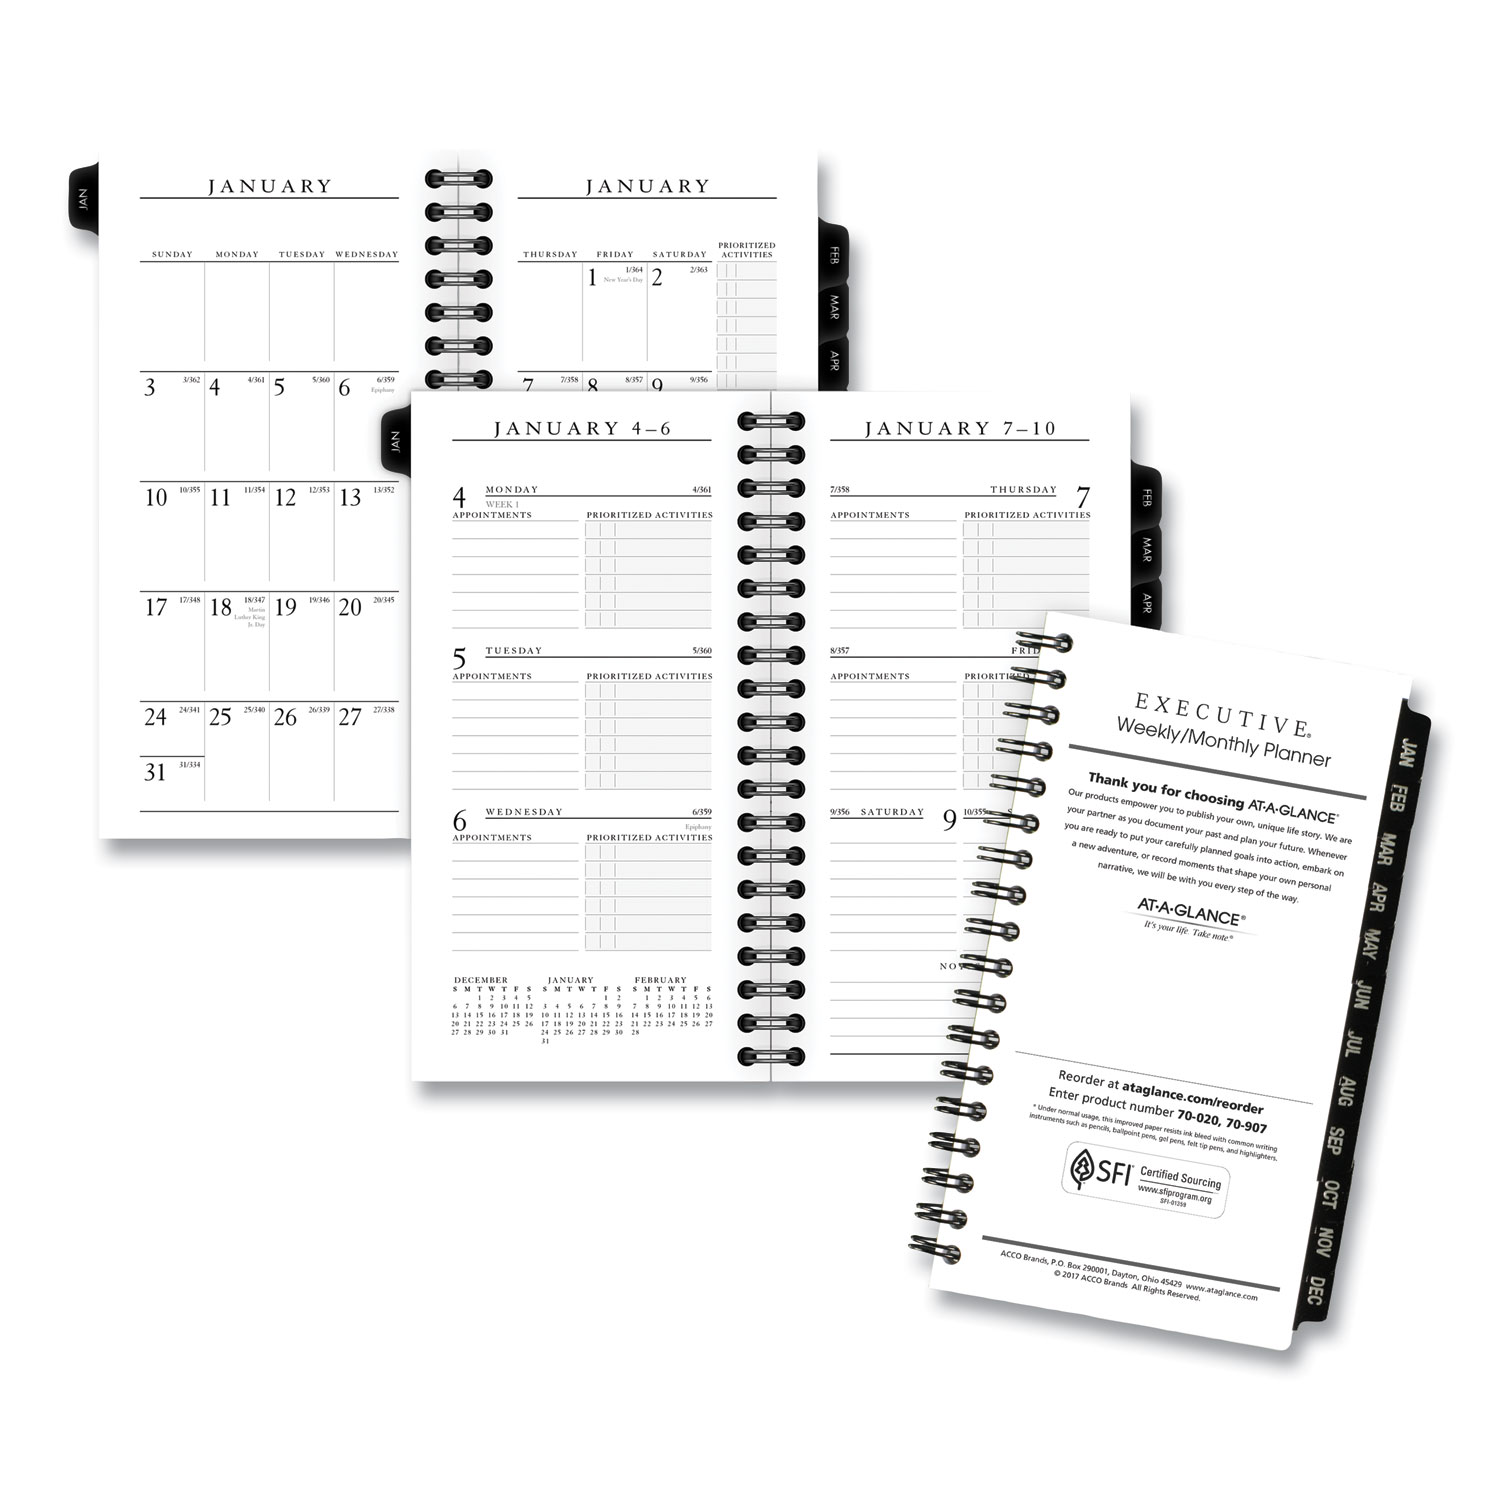  AT-A-GLANCE 7090710 Executive Pocket Size Weekly/Monthly Planner Refill, 6 1/4 x 3 1/4, White, 2020 (AAG7090710) 